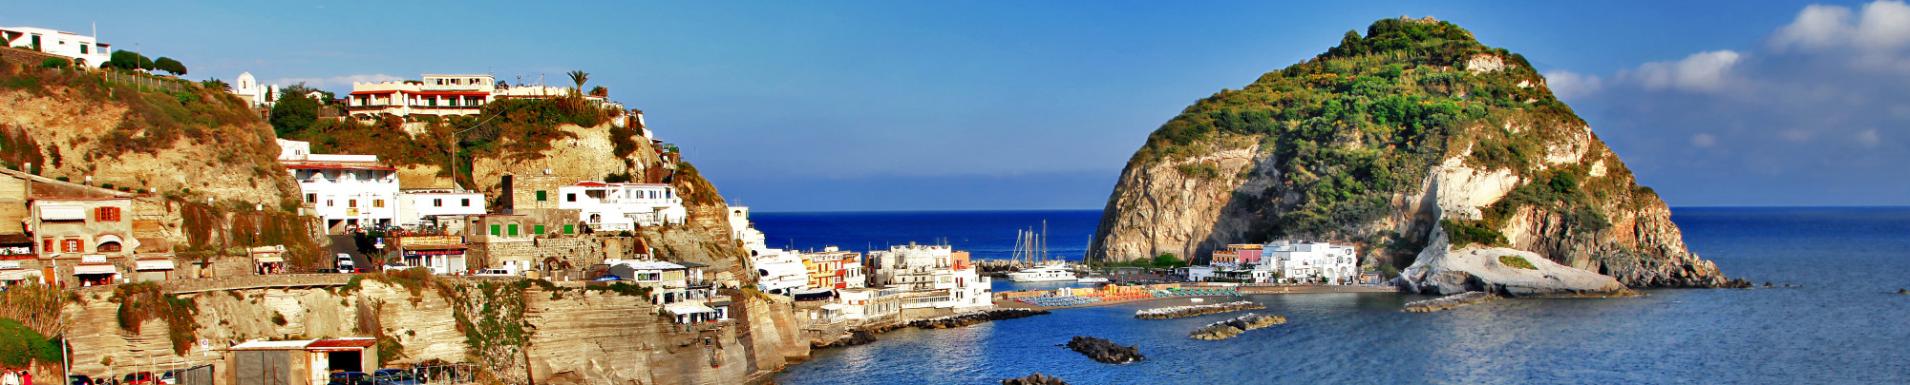 Holidays Offer in Ischia in bed & breakfast treatment